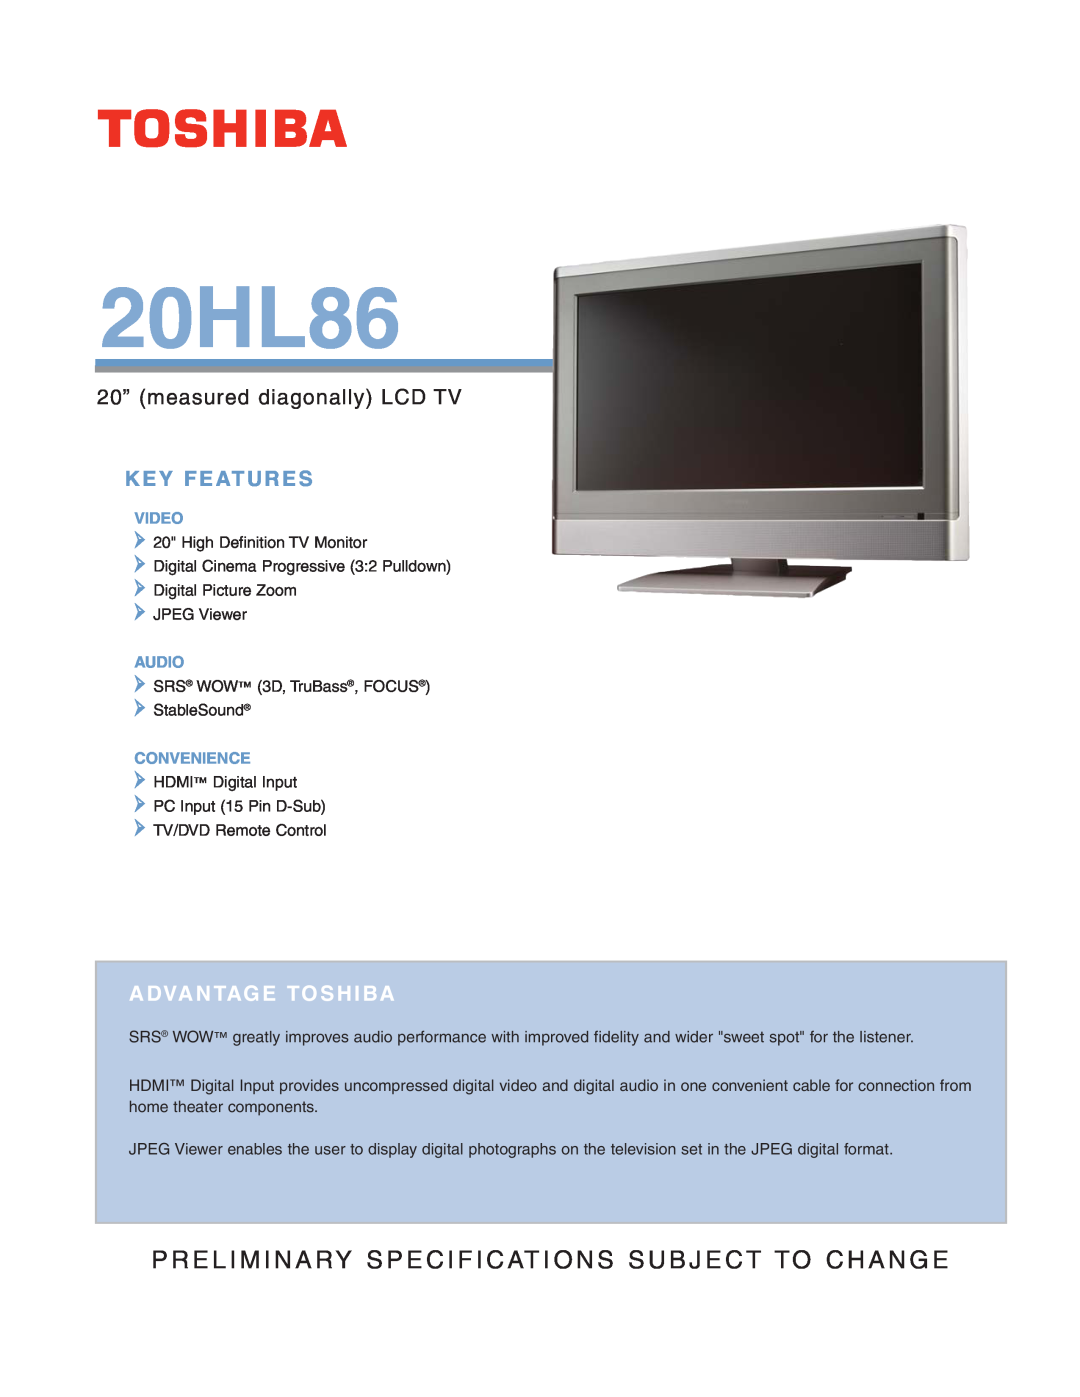 Toshiba 20HL86 specifications Key Features, 20” measured diagonally LCD TV, Advantage Toshiba, Video, Audio, Convenience 